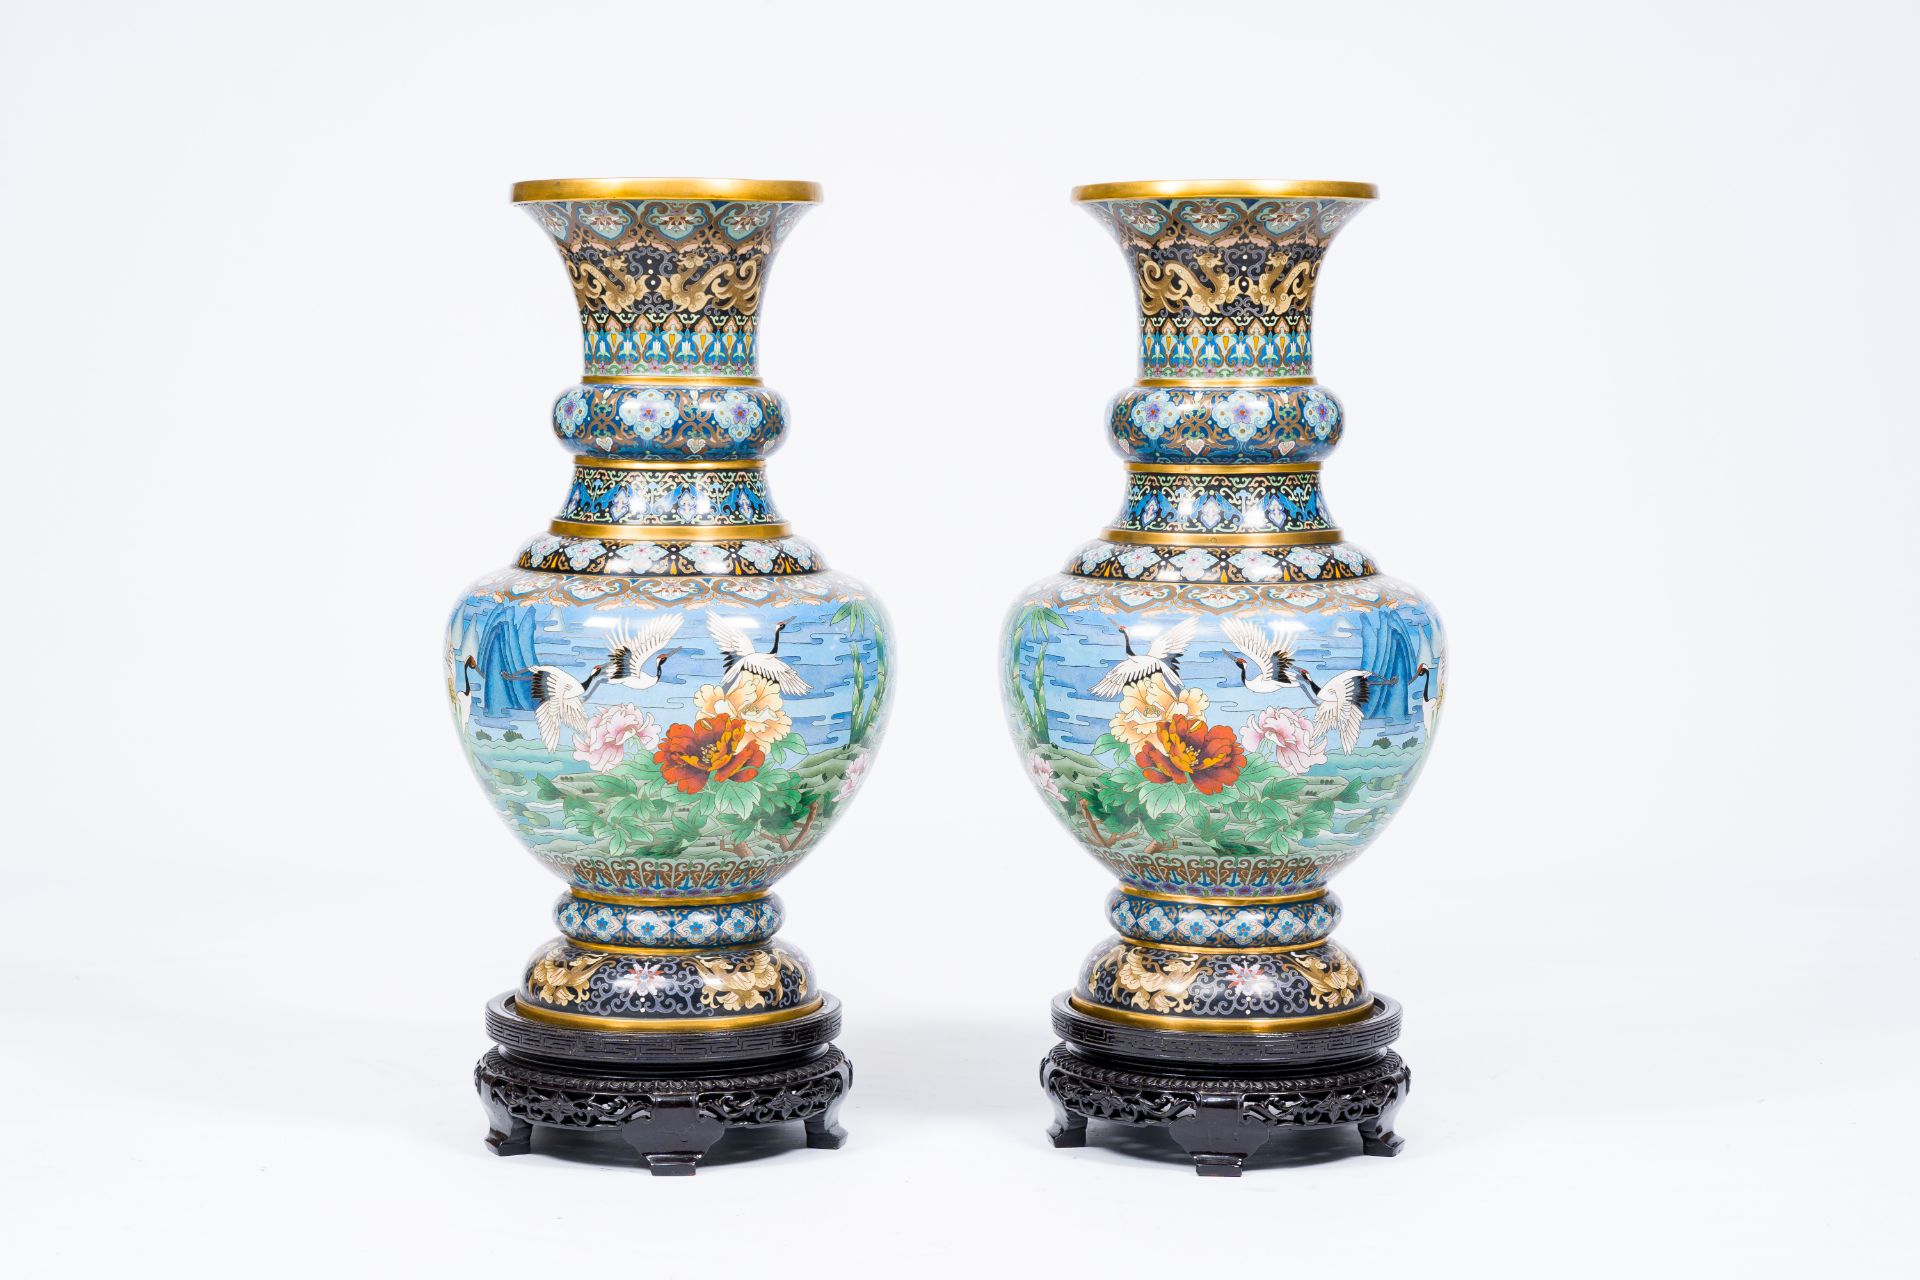 A pair of large Chinese cloisonne 'cranes' vases, 20th C.